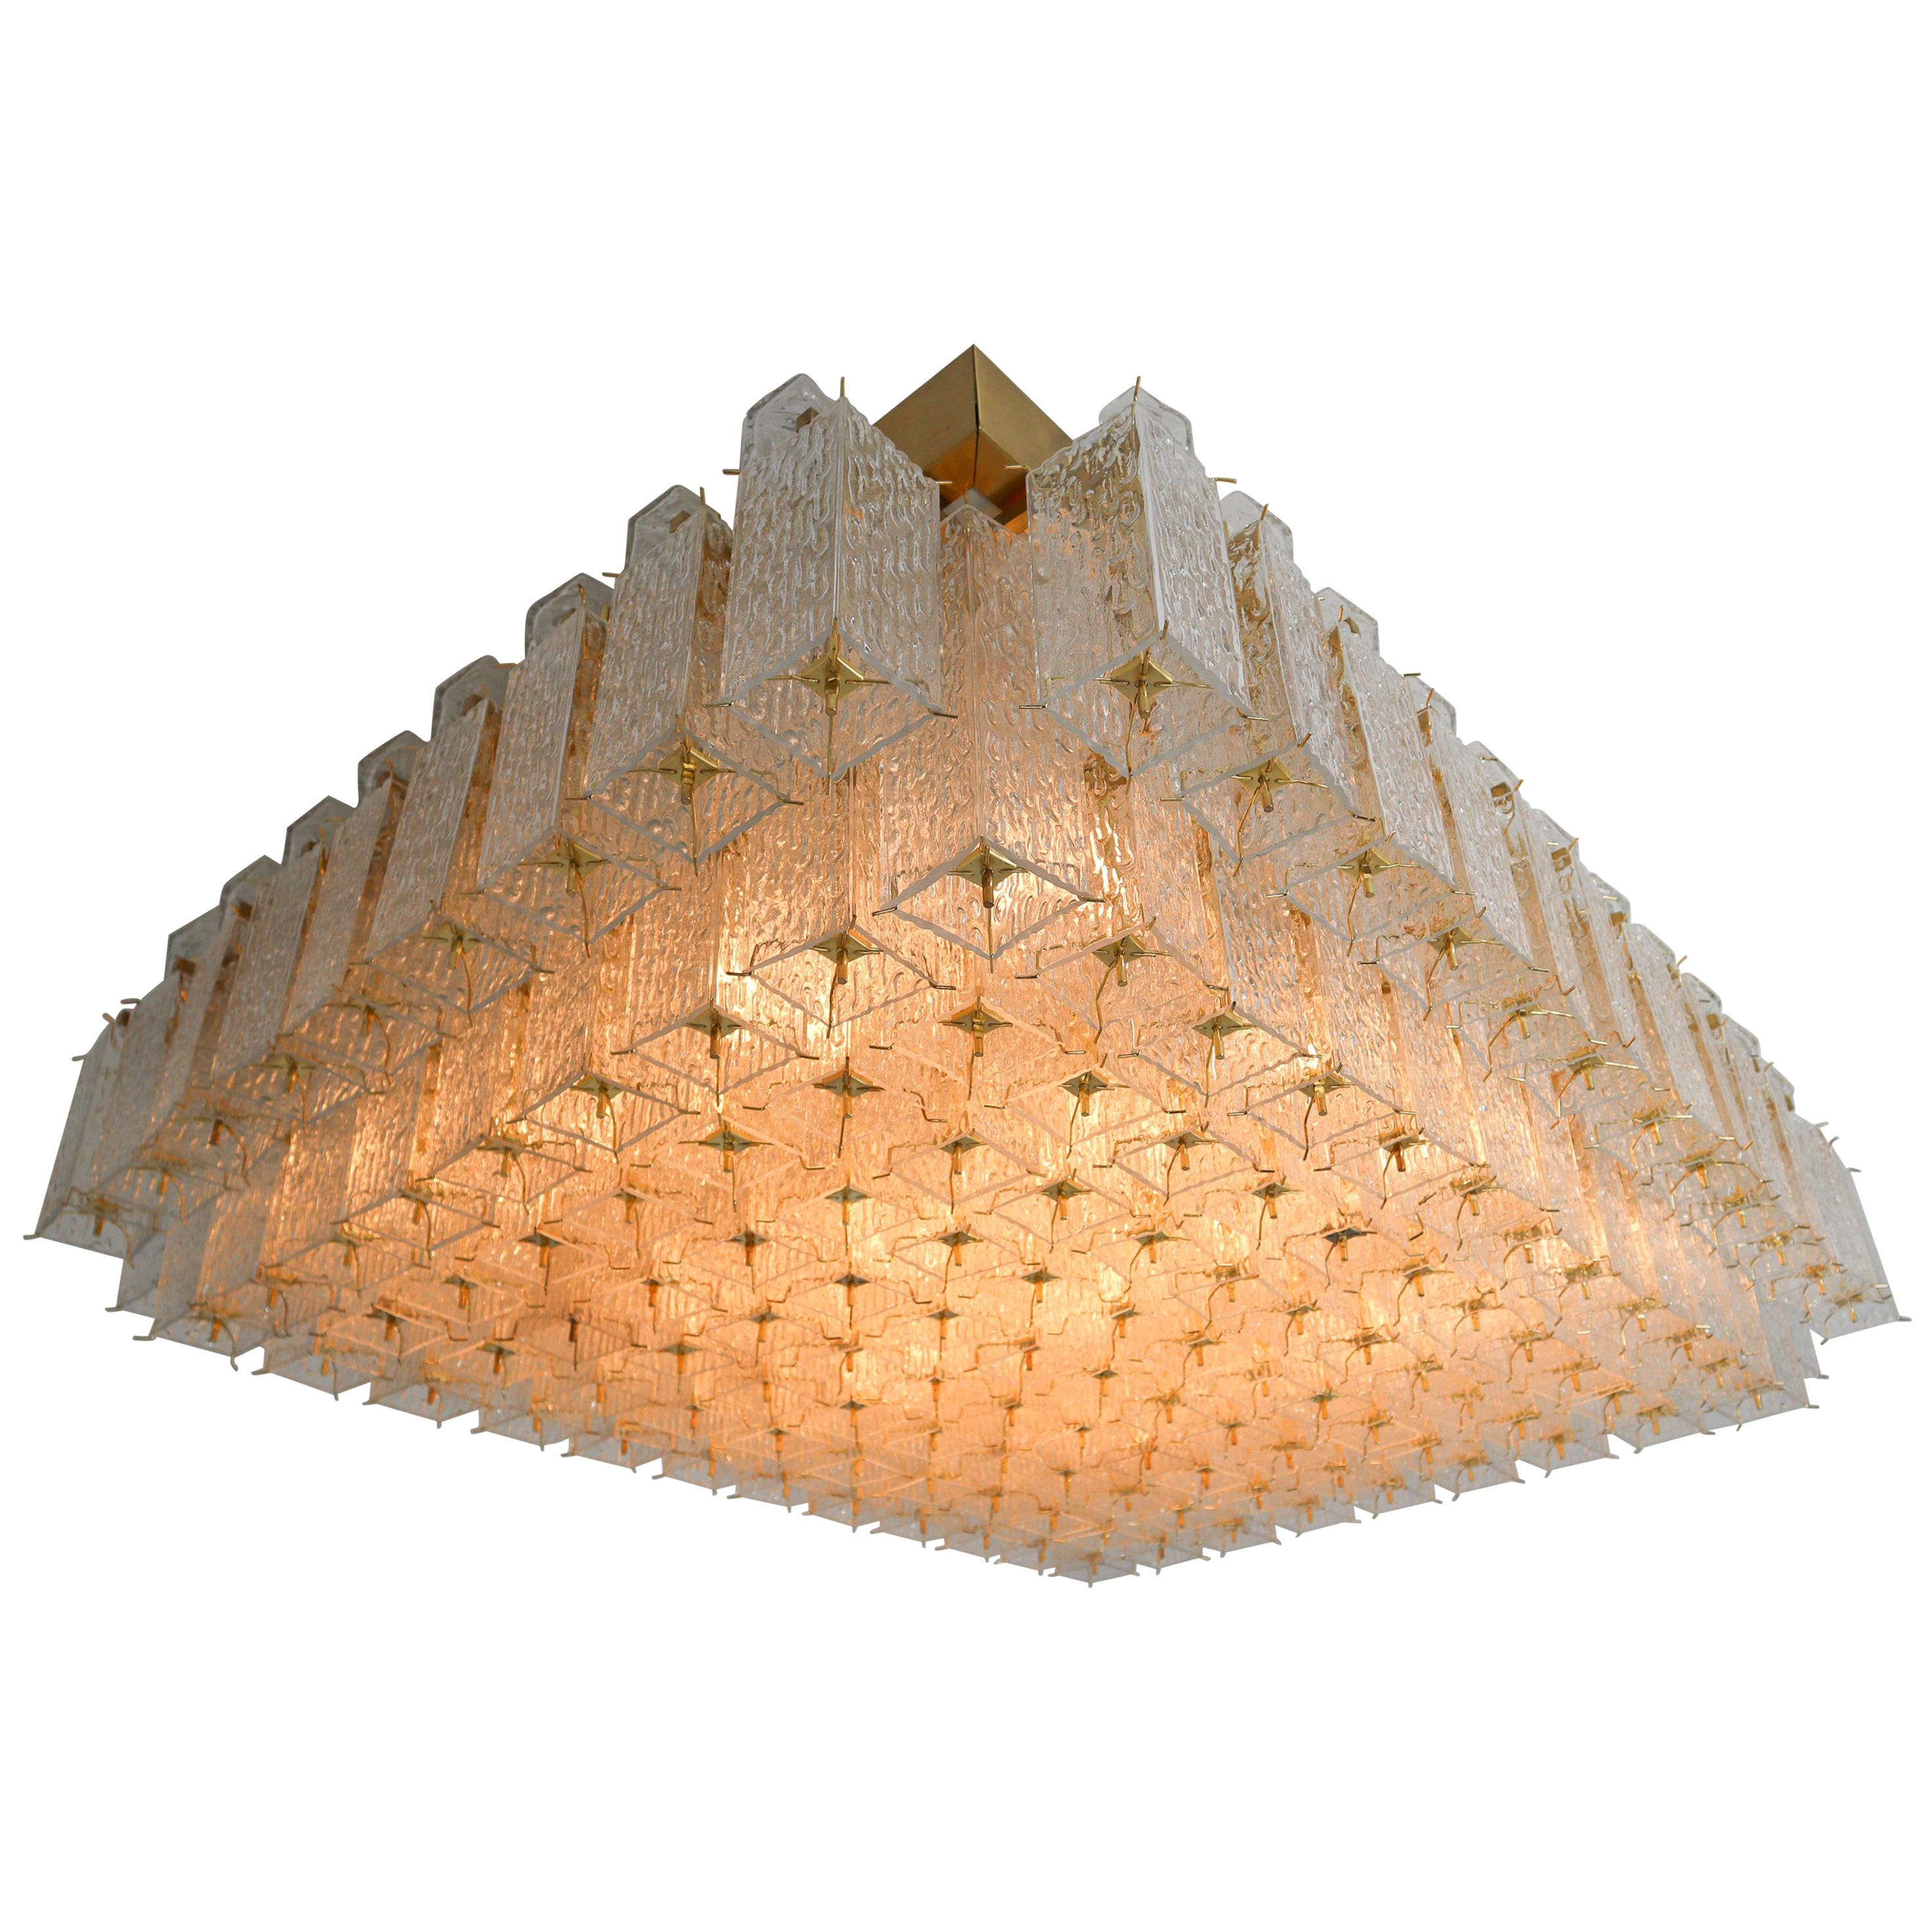 Grand Midcentury Flushmount, Chandelier in Structured Glass and Brass, Europe